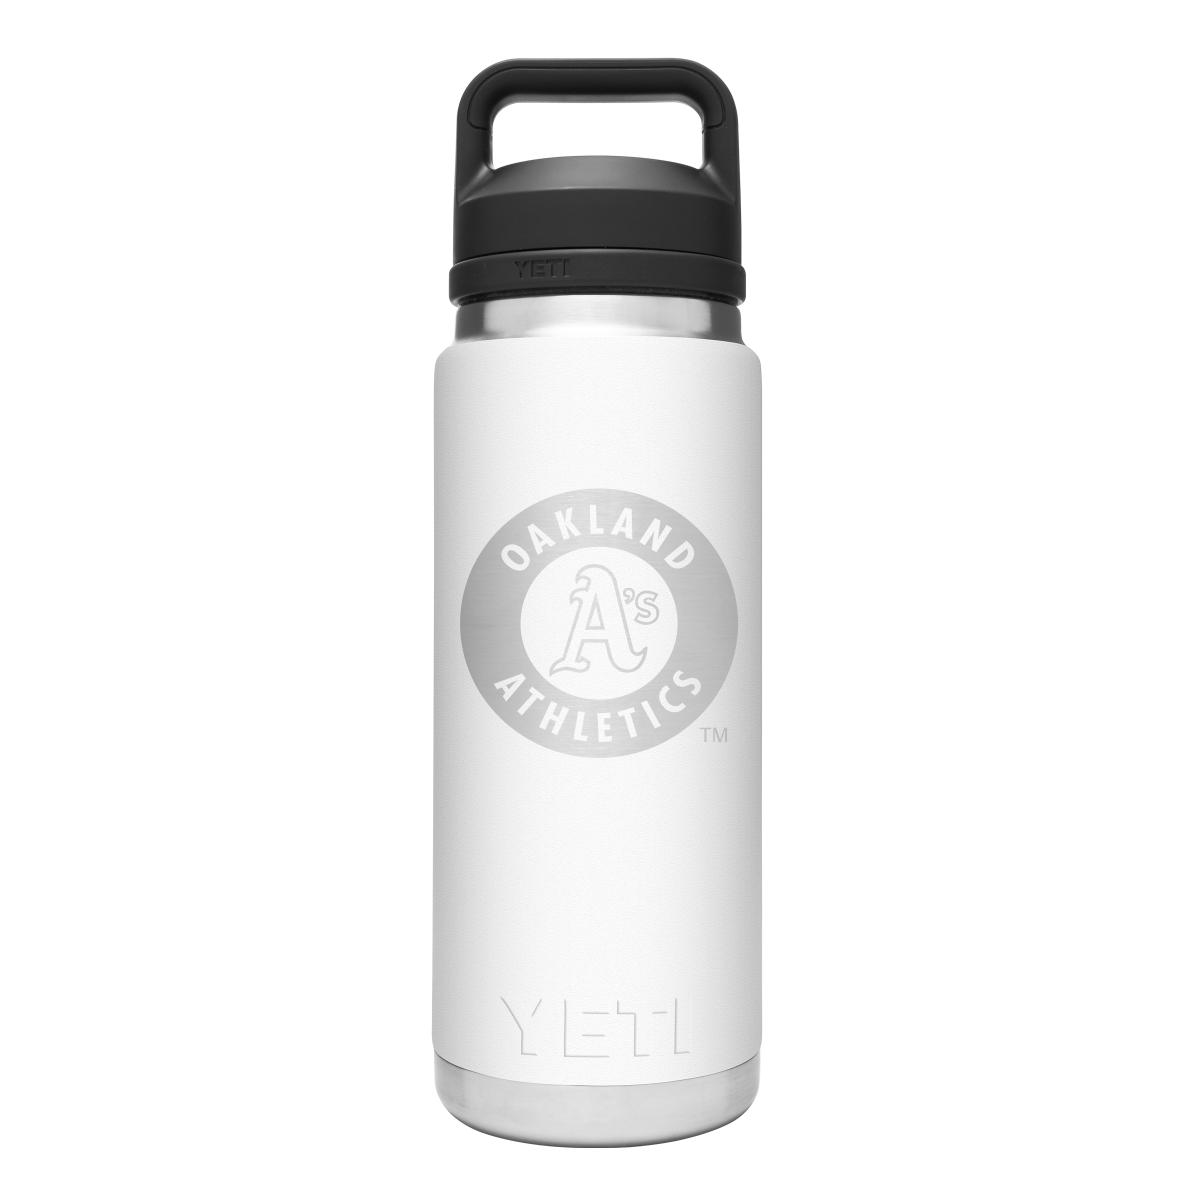 Oakland A's 26 Oz Bottle with Chug Cap from YETI - $50.00